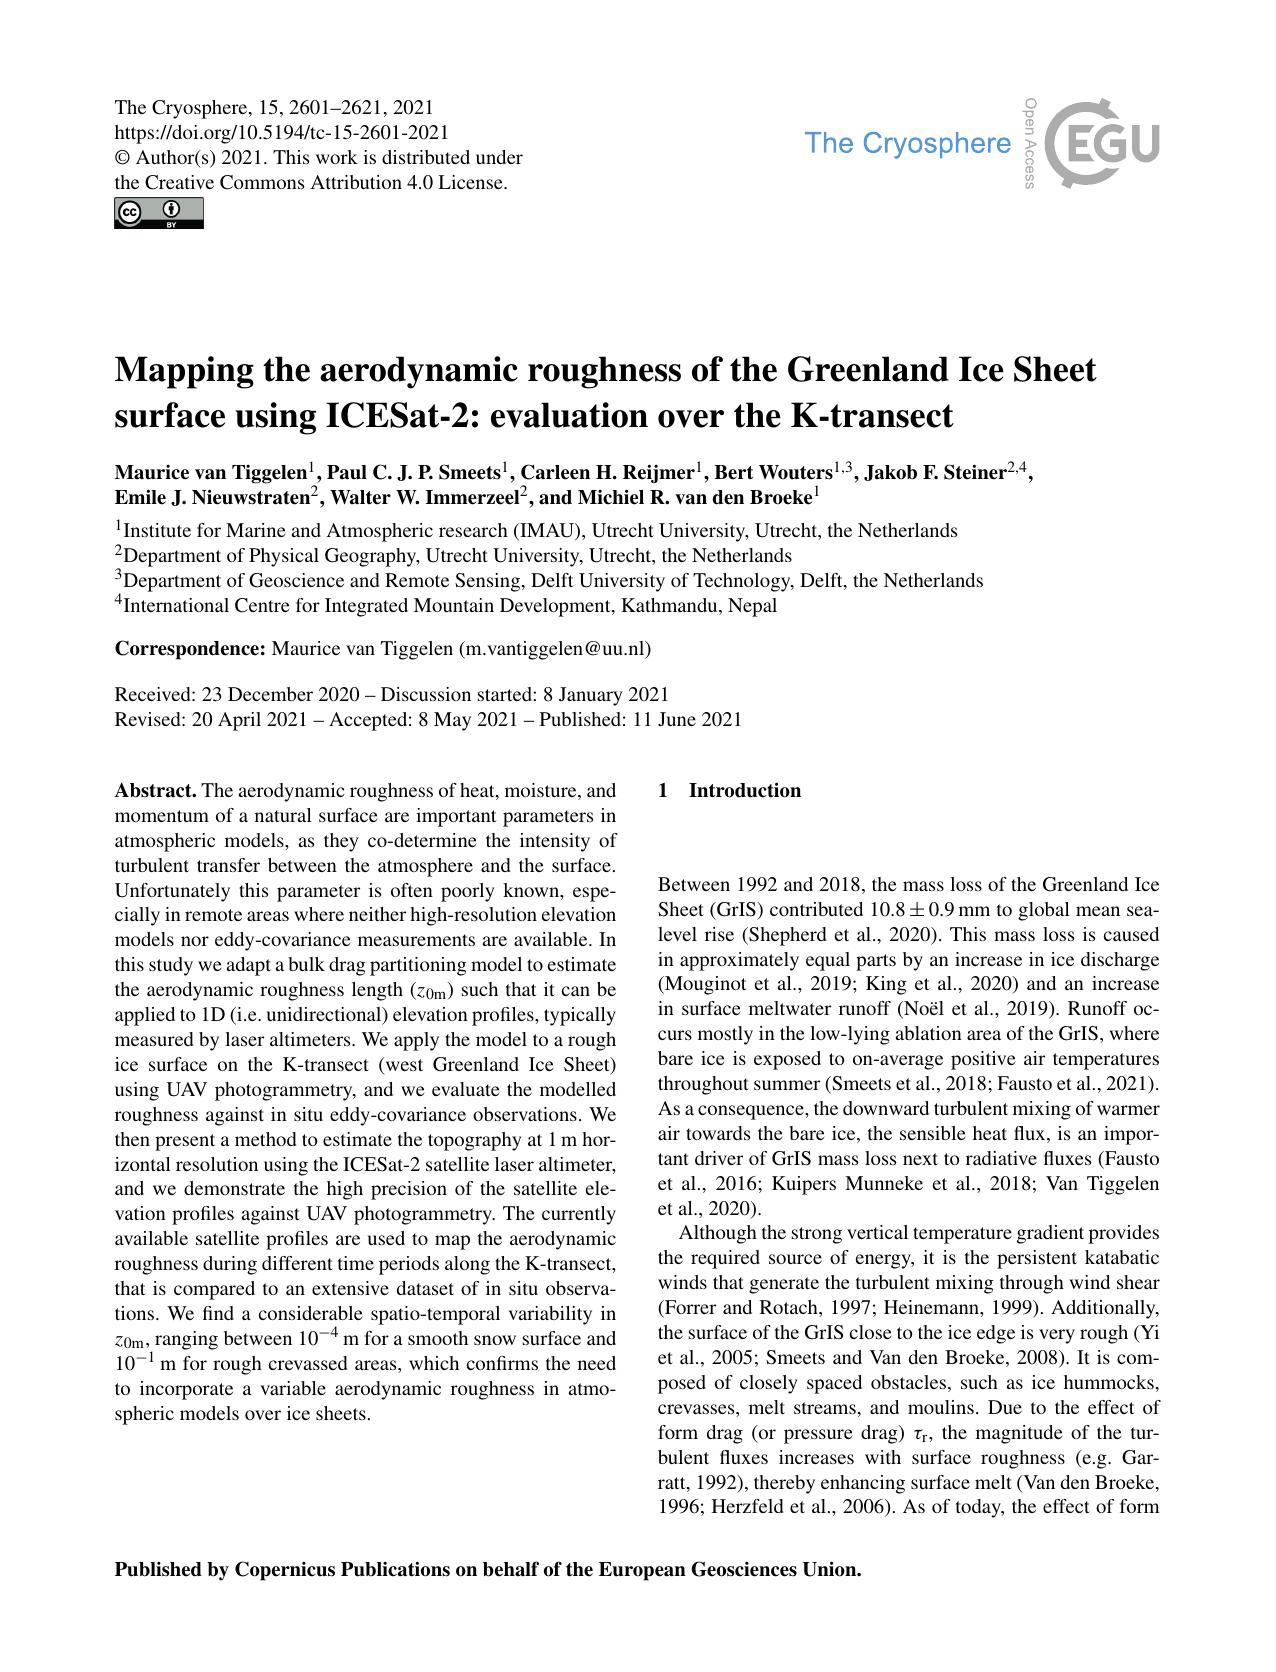 Mapping the aerodynamic roughness of the Greenland Ice Sheet surface using ICESat-2: Evaluation over the K-transect